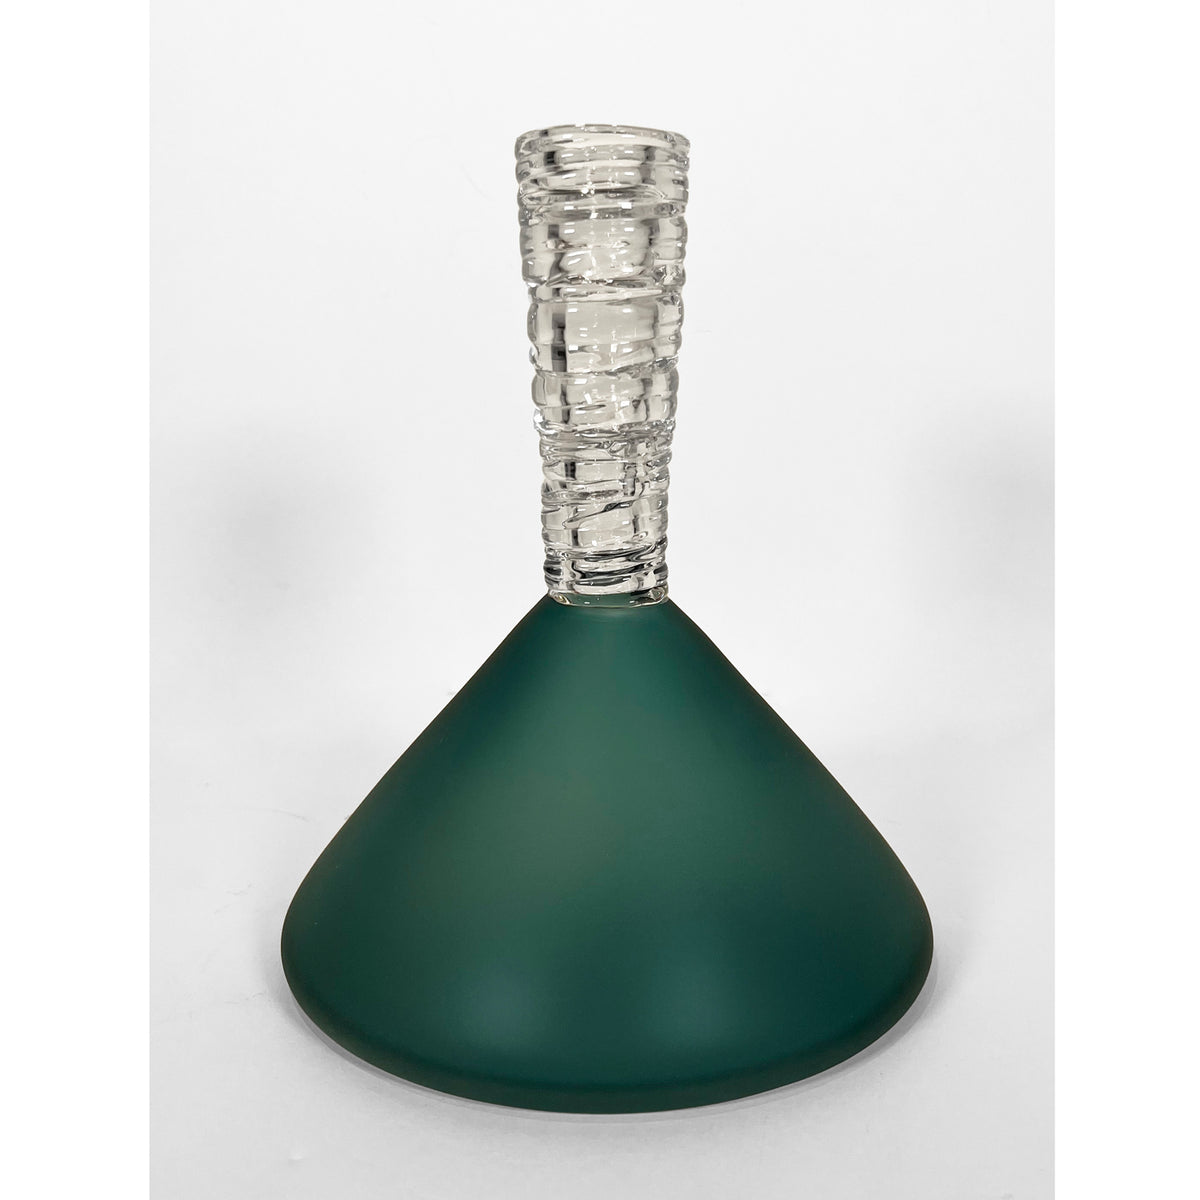 Jaan Andres - Potions Steel Cone Small, 8.5" x 6.5" x 6.5"